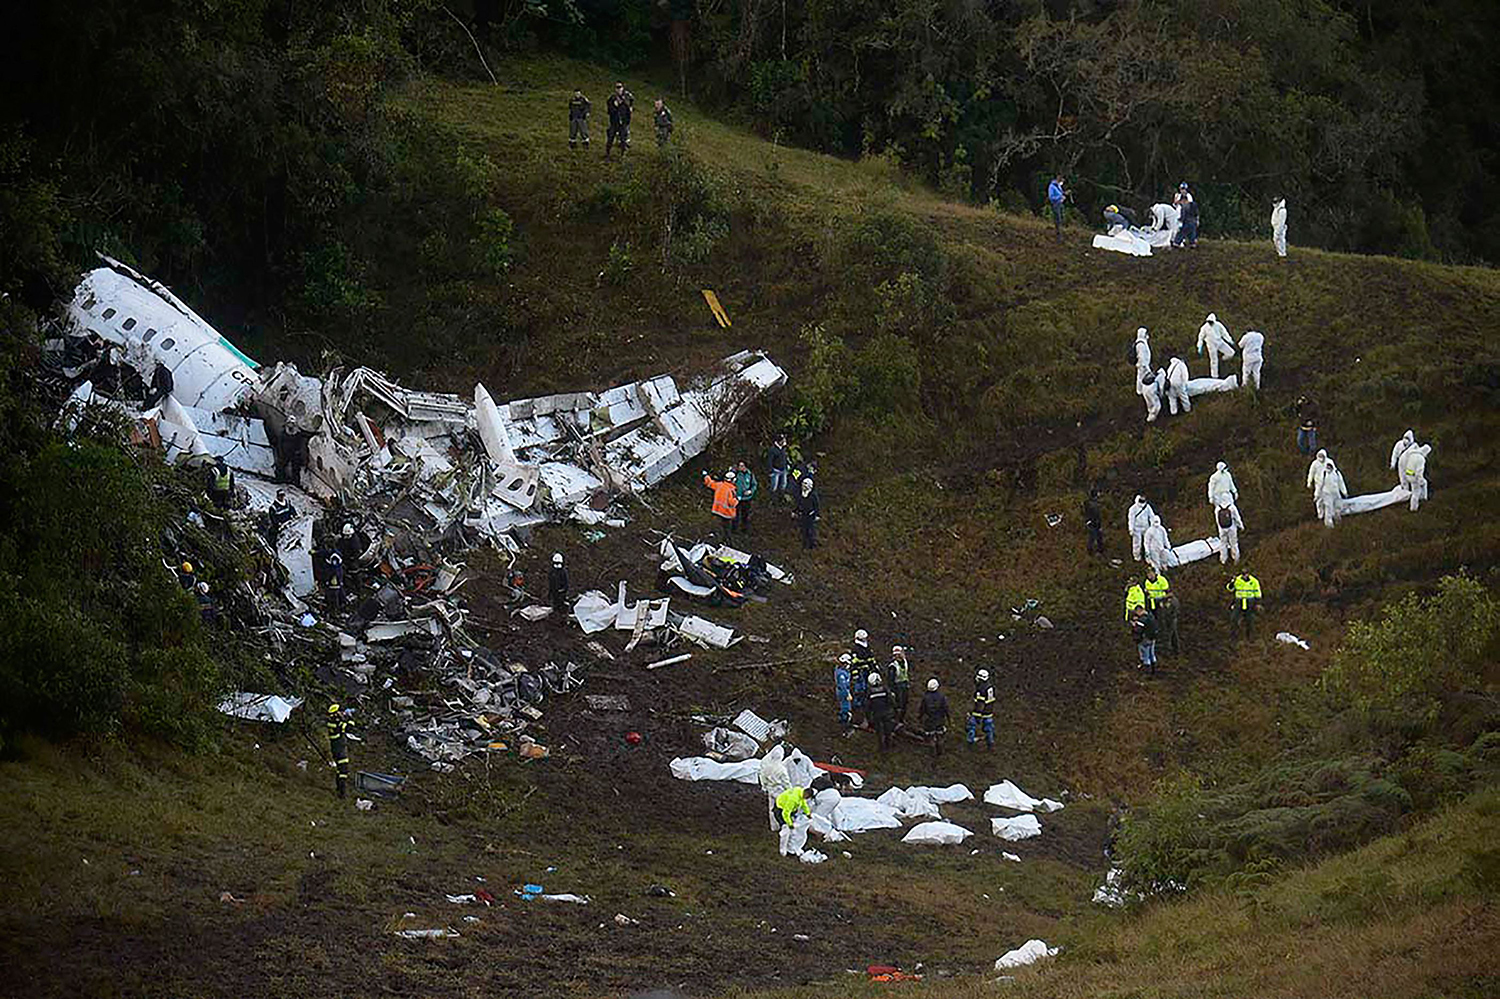 TOPSHOT - Rescuers search for survivors from the wreckage of the LAMIA airlines charter plane carrying members of the Chapecoense Real football team that crashed in the mountains of Cerro Gordo, municipality of La Union, on November 29, 2016. A charter plane carrying the Brazilian football team crashed in the mountains in Colombia late Monday, killing as many as 75 people, officials said. / AFP PHOTO / Raul ARBOLEDA / TT / kod 444